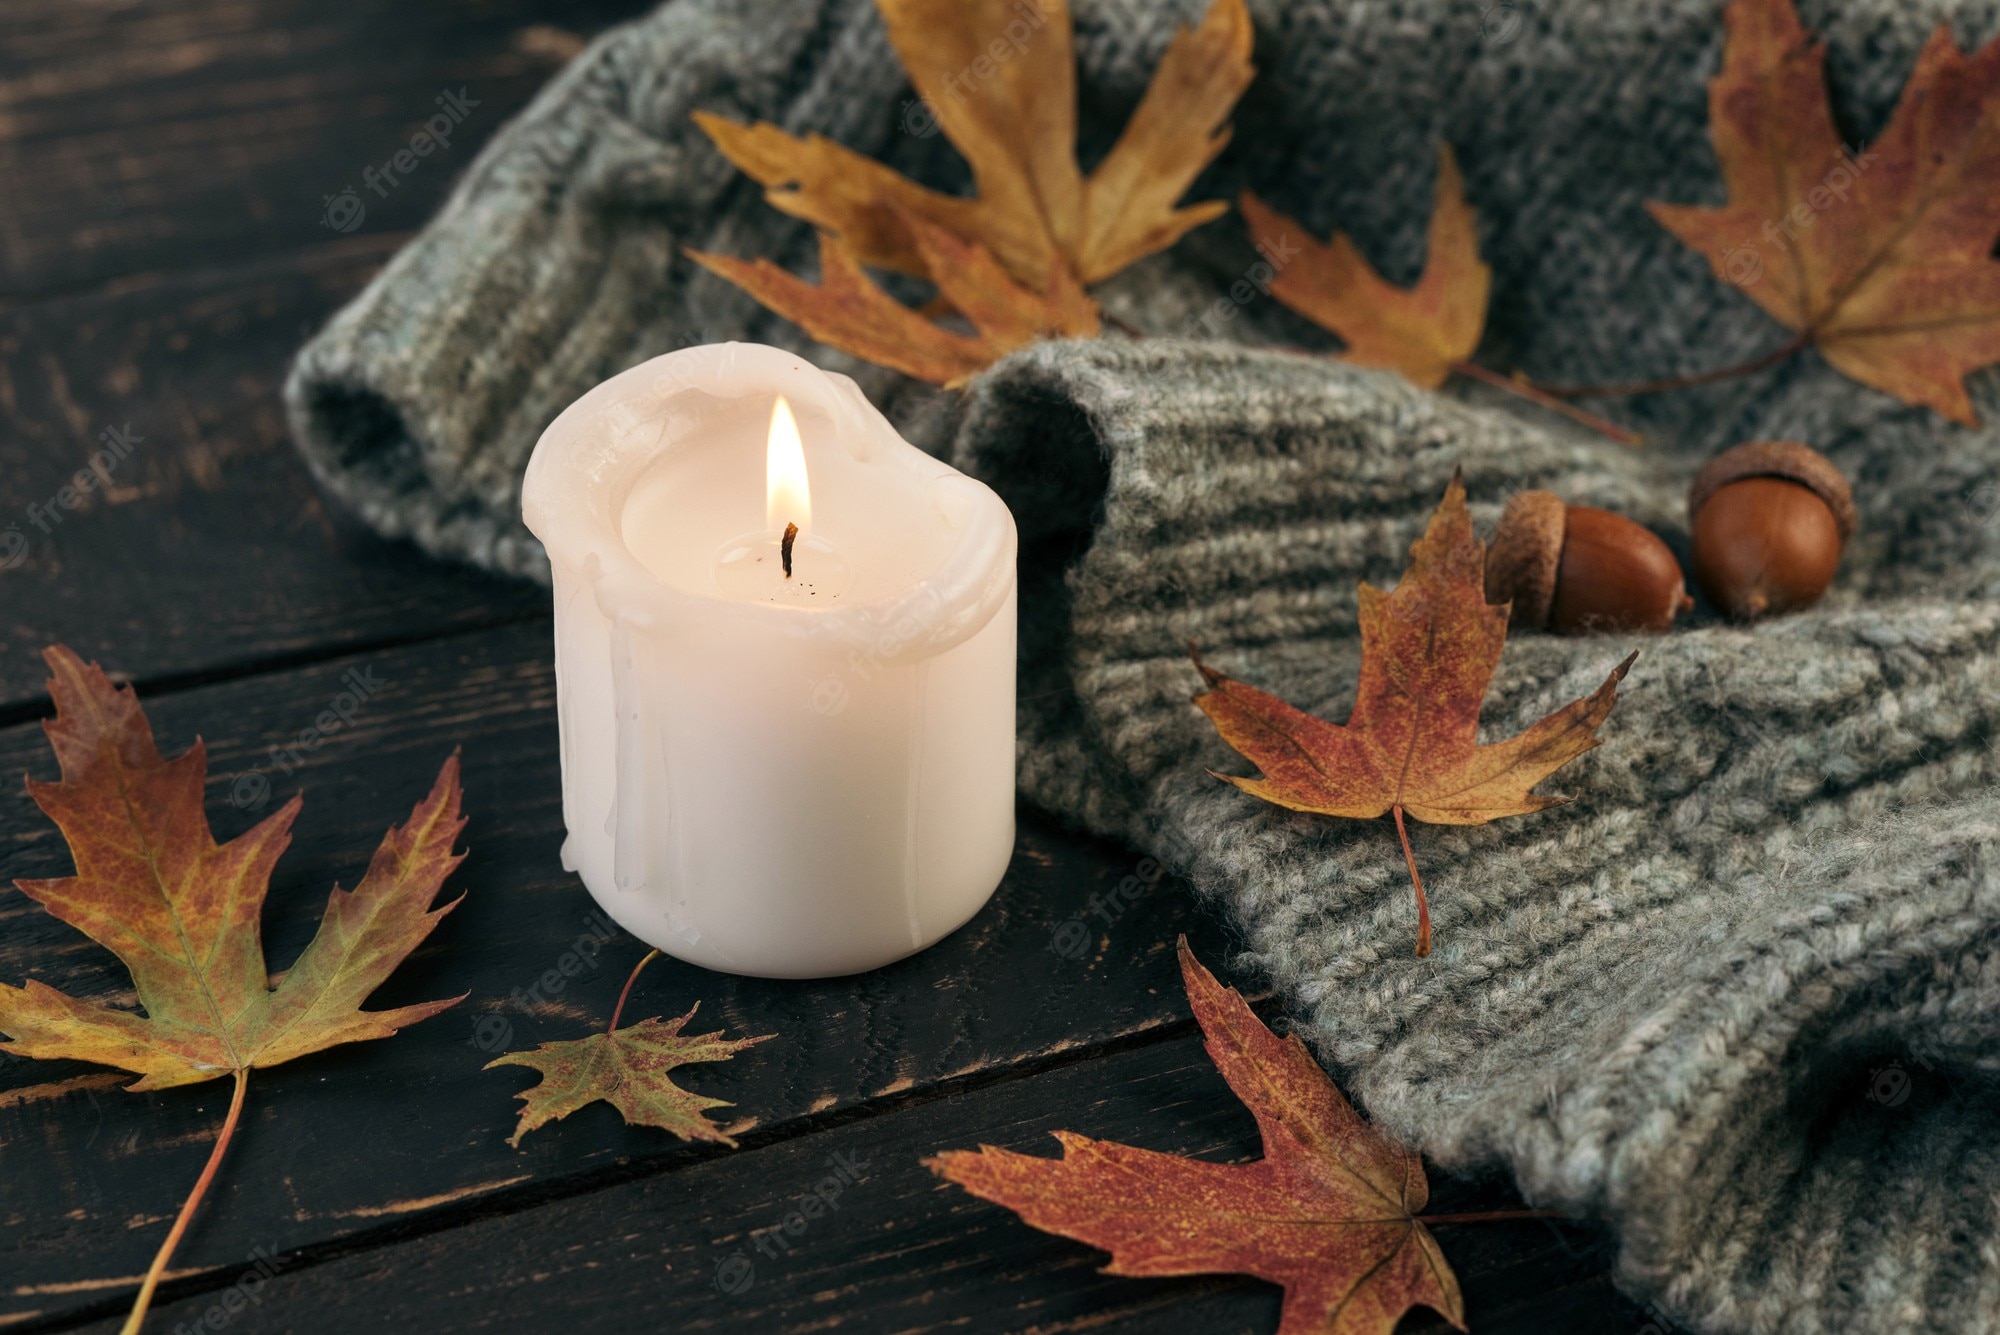 Premium Photo. Cozy and autumnal atmosphere. a candle is burning against the background of a knitted blanket with fallen autumn leaves on a dark wooden table